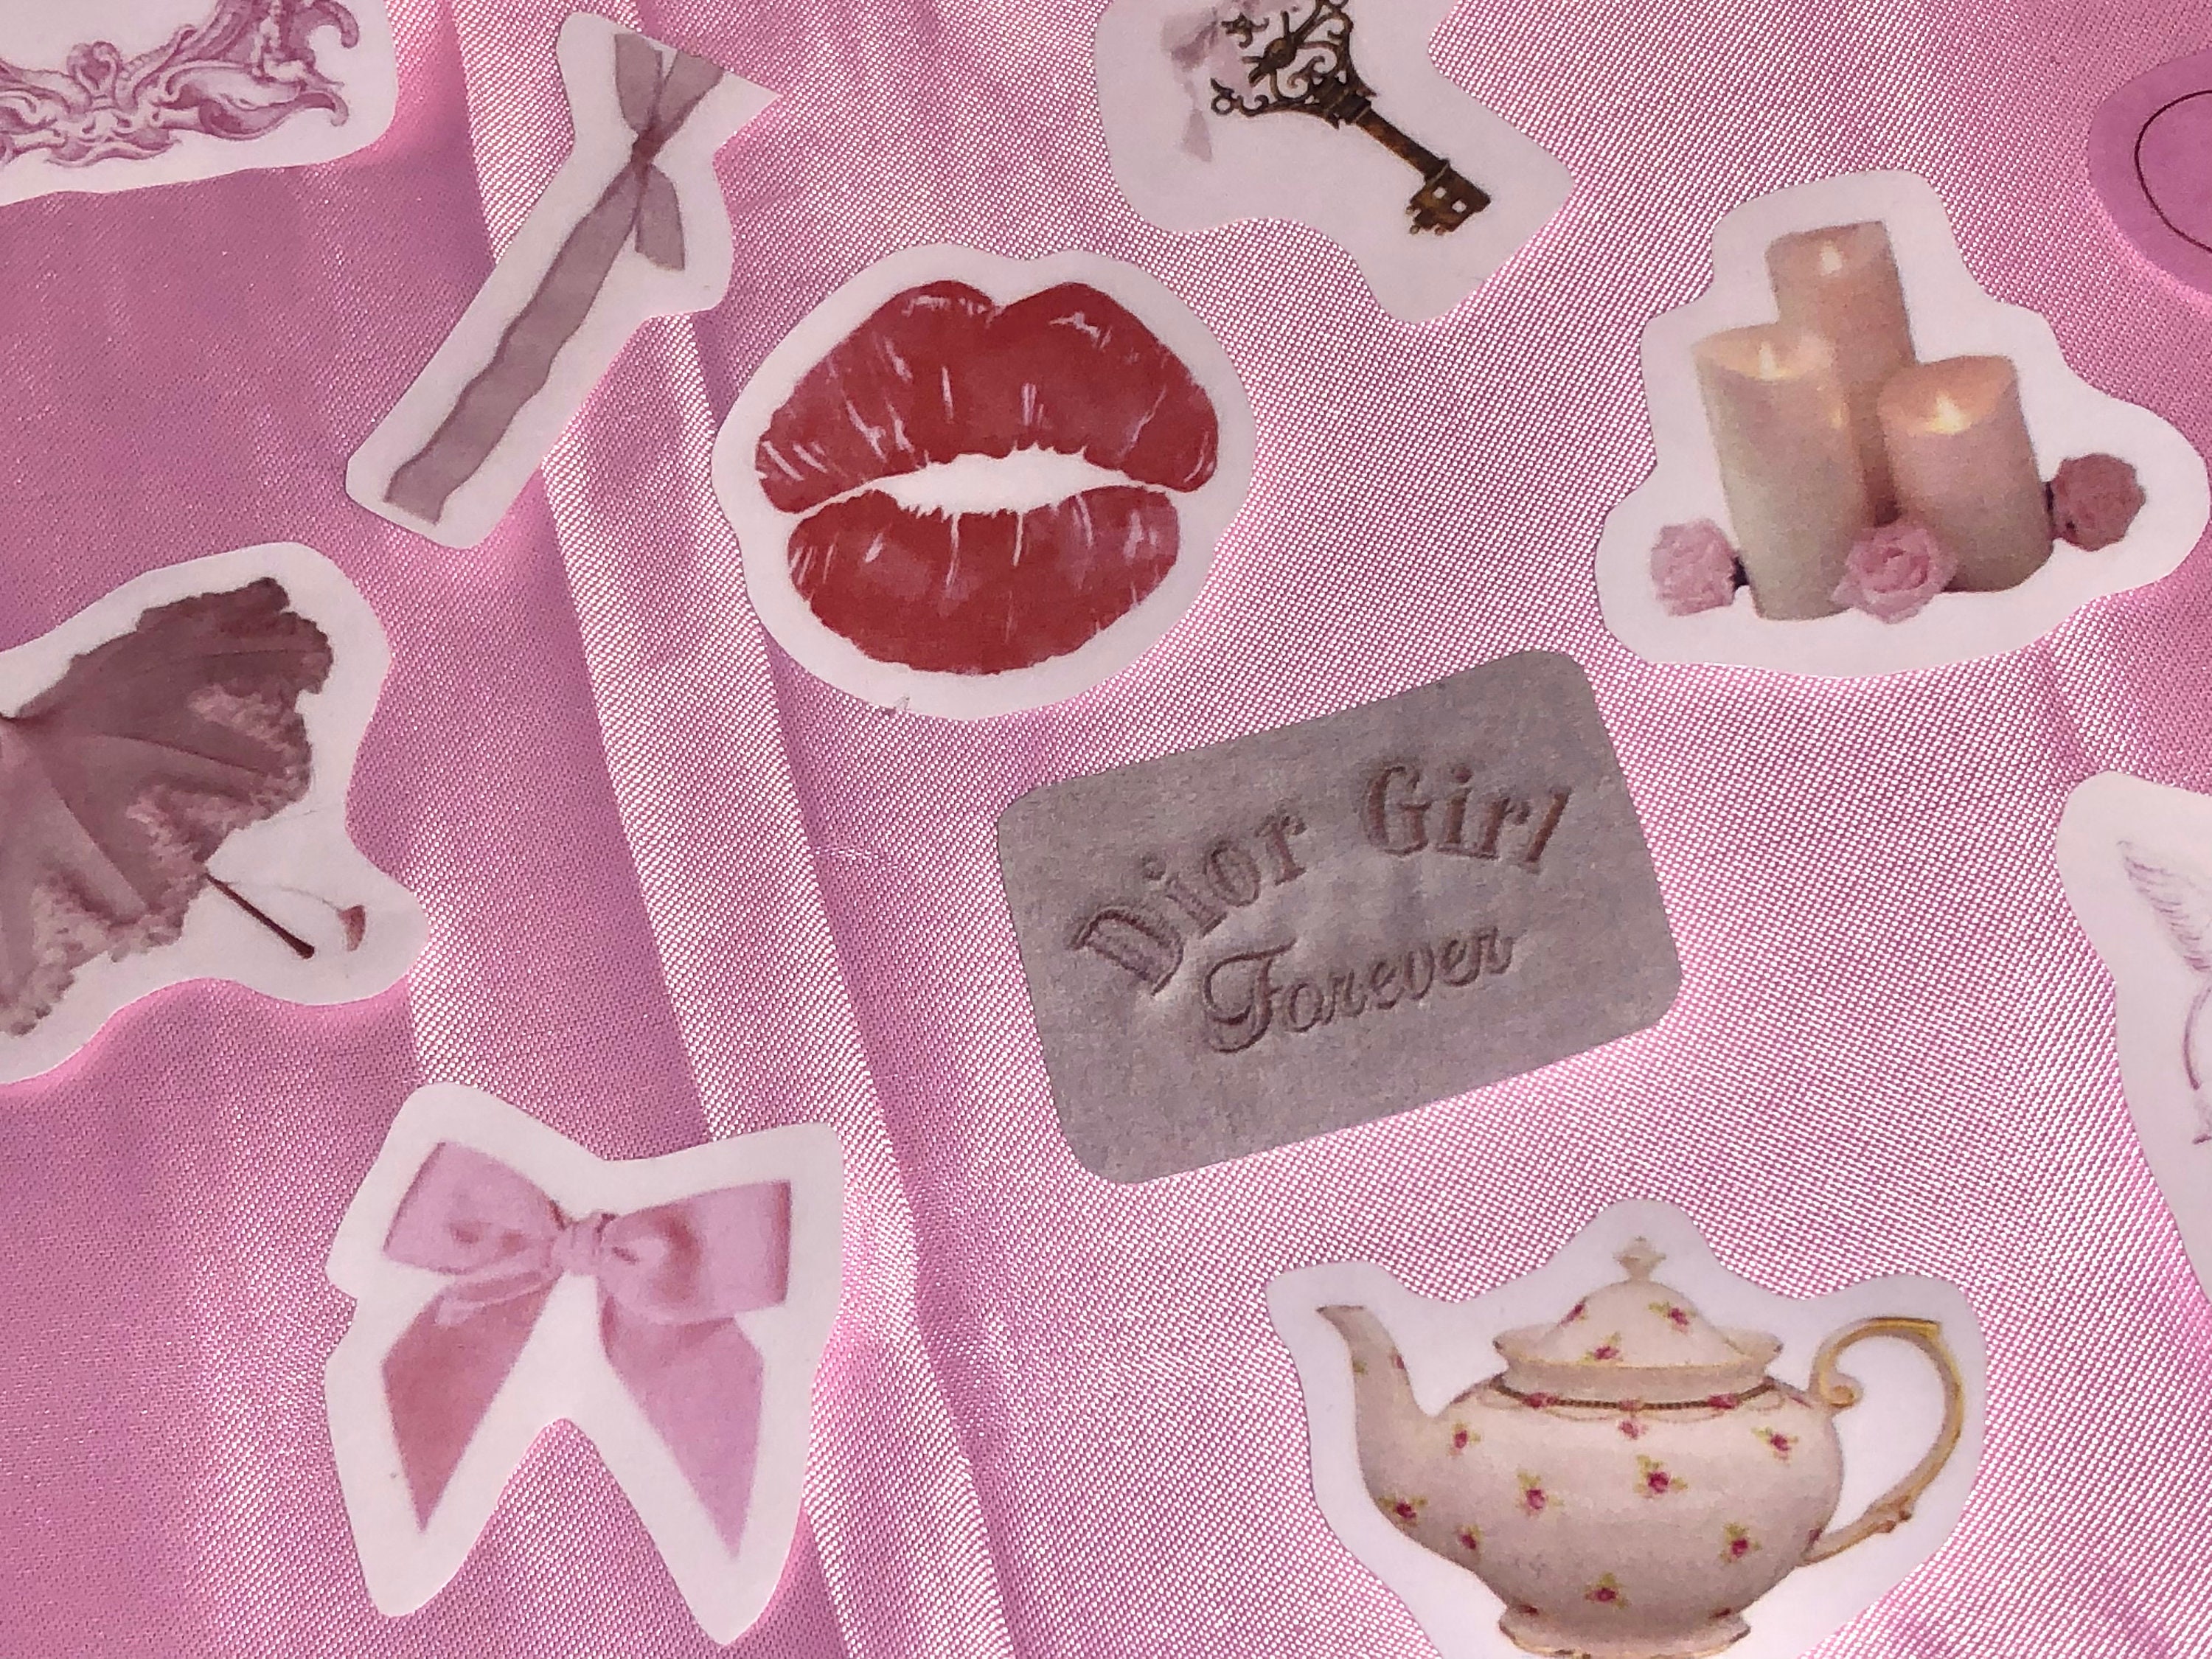 Red coquette aesthetic stickers pack | femme fatale sticker pack | Sticker